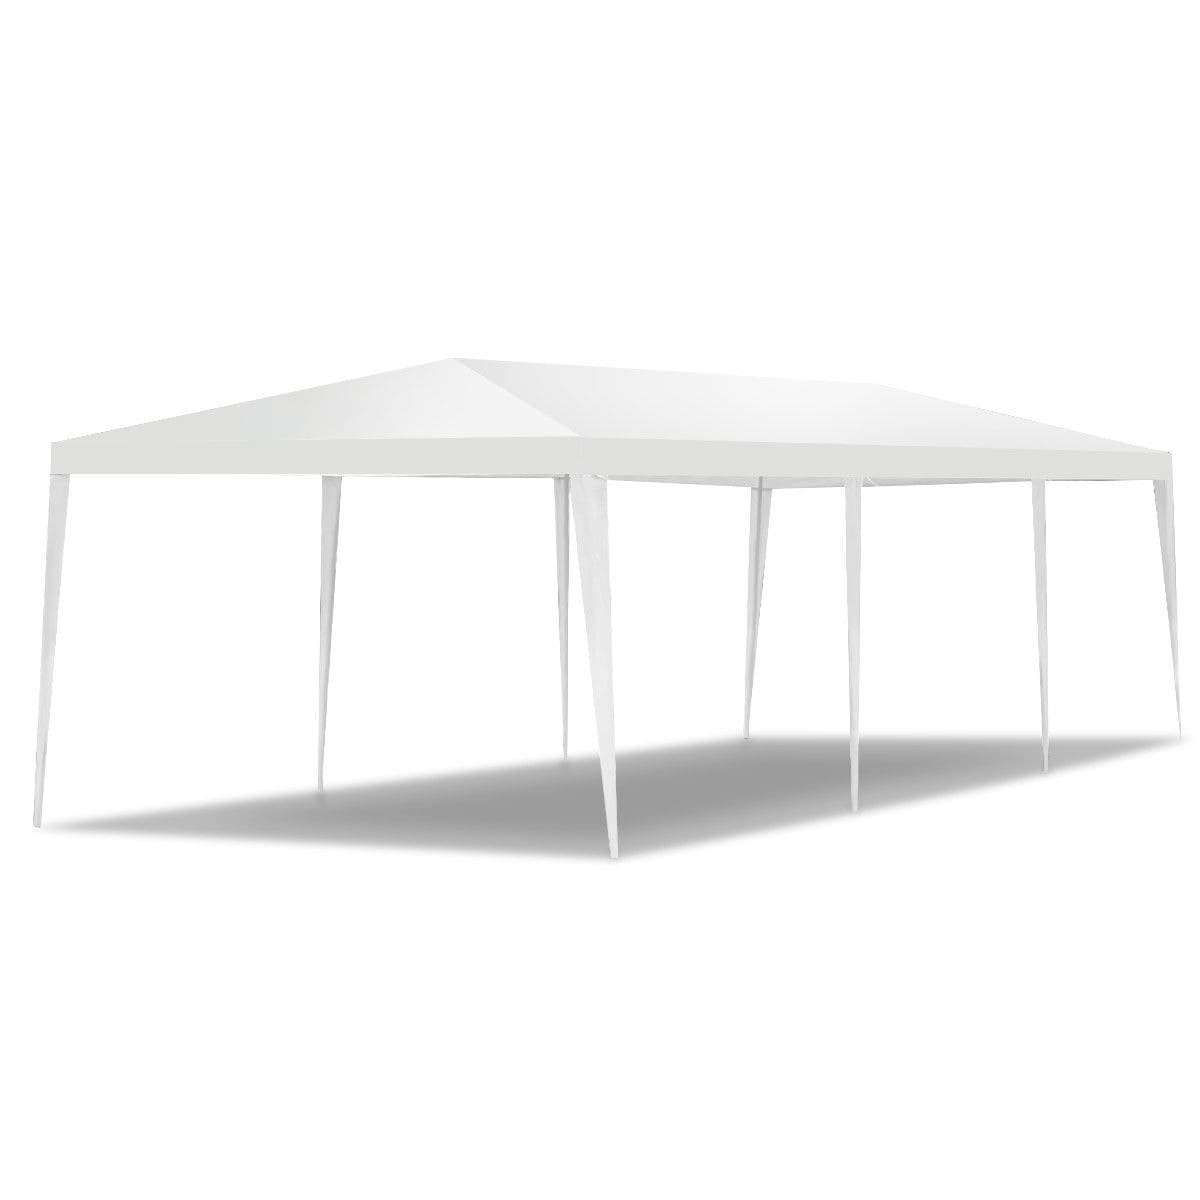 10' x 30' Outdoor Canopy Party Wedding Tent-White ...